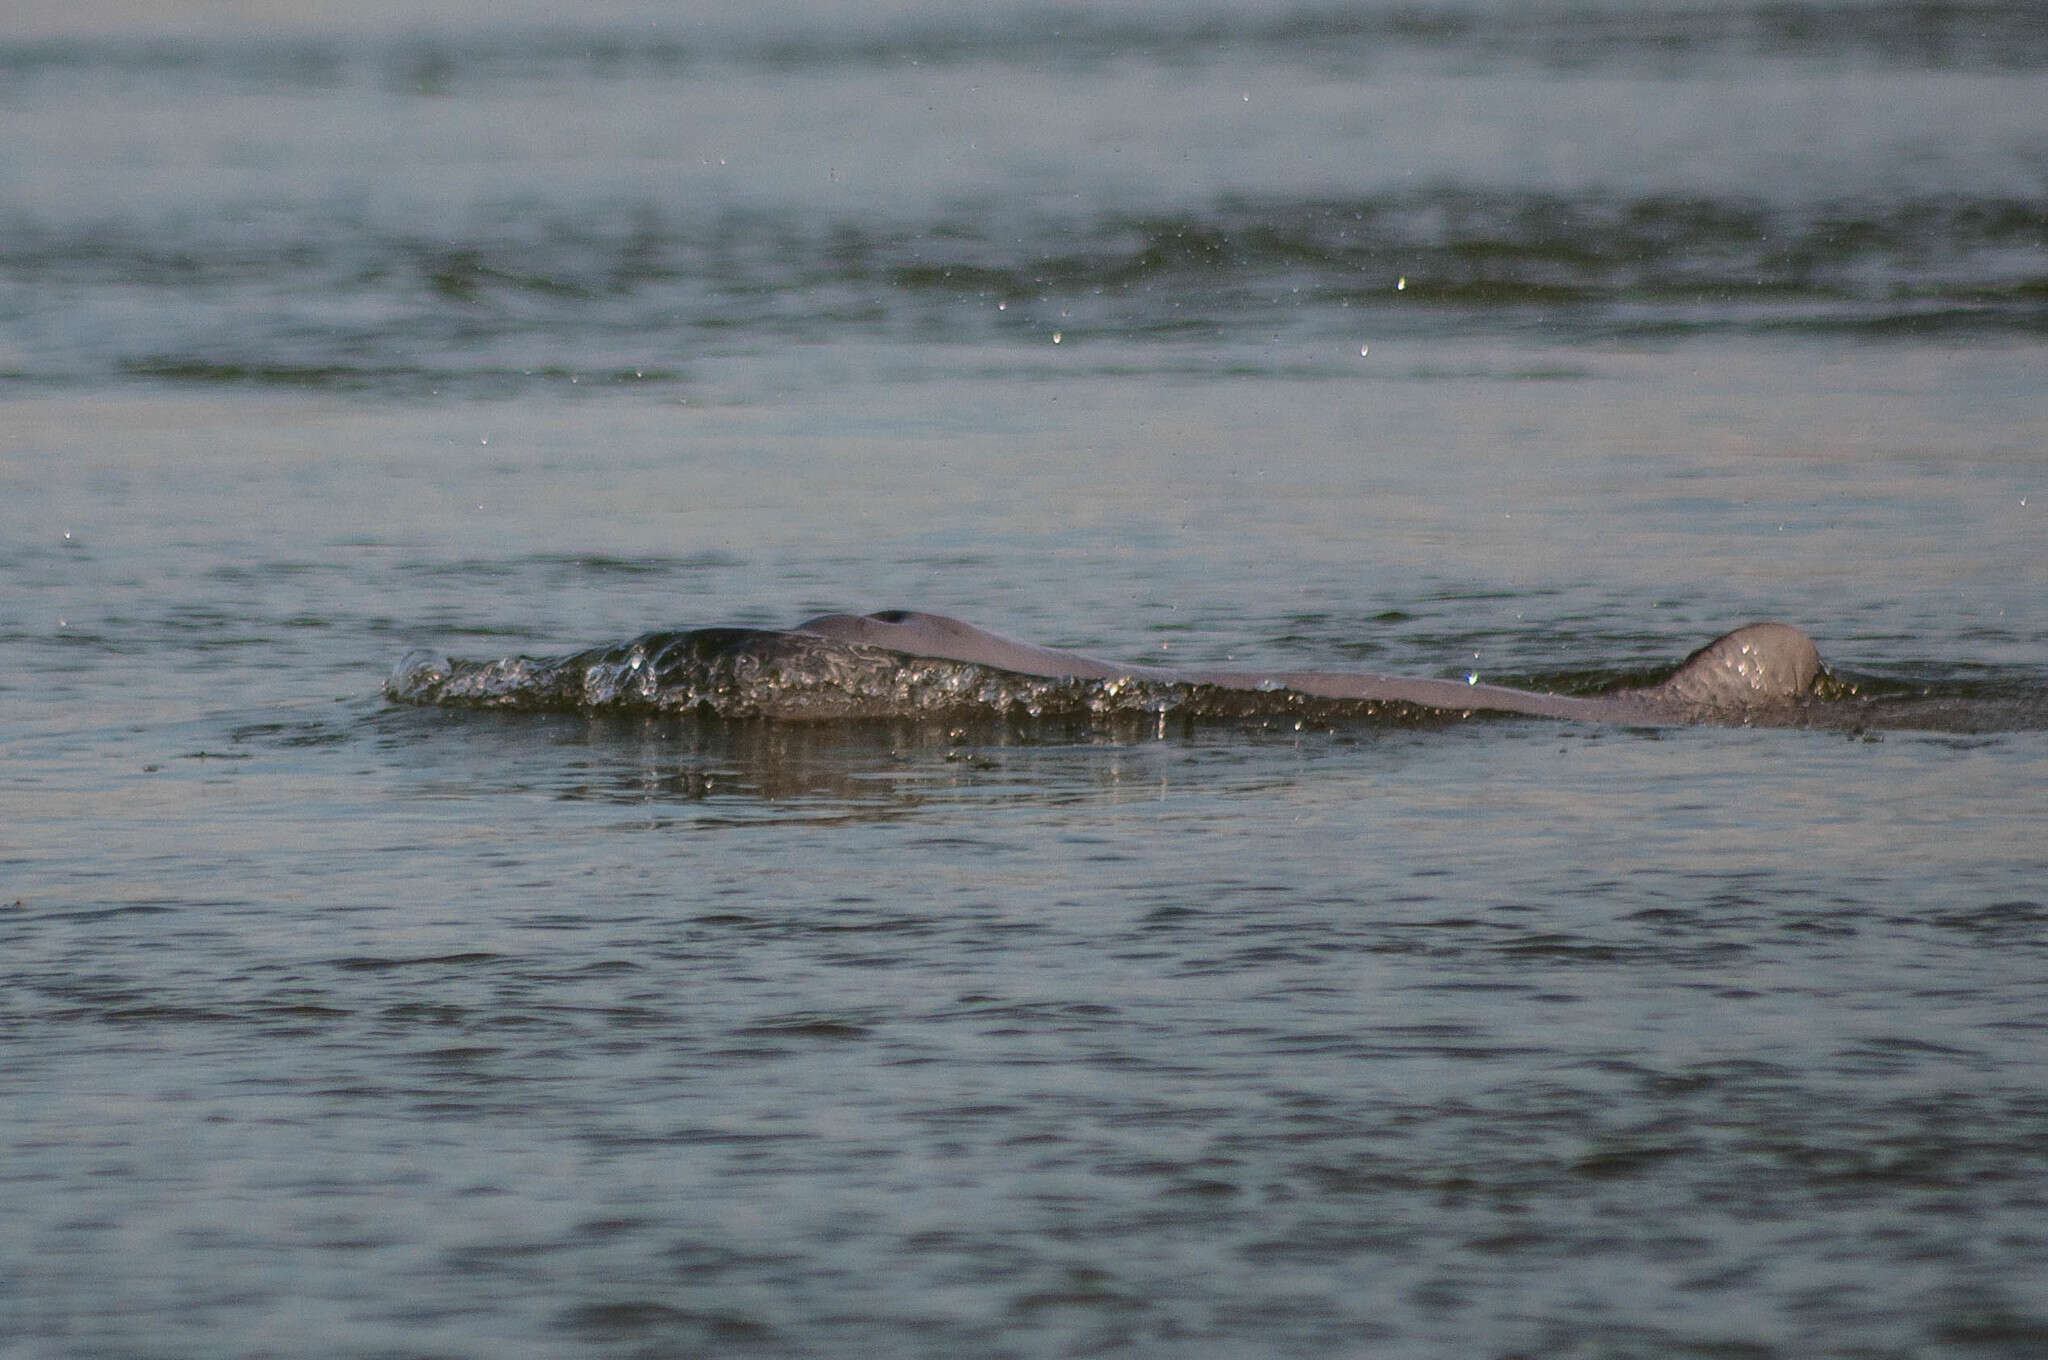 Image of Snubfin Dolphins